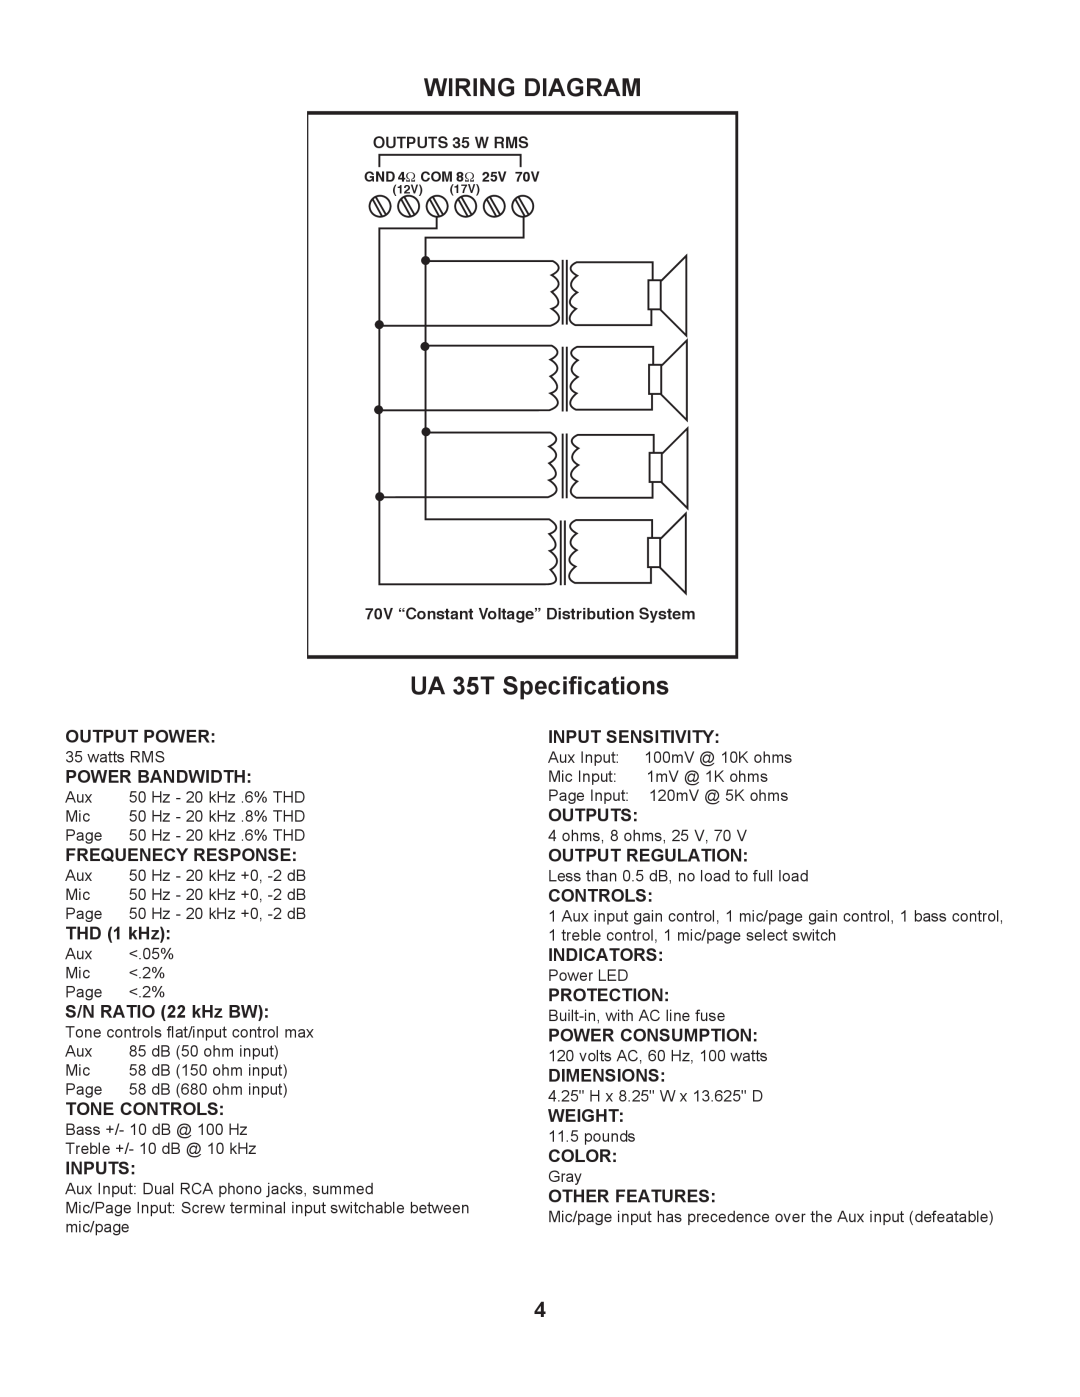 Peavey UA 35T II Wiring Diagram, UA 35T Specifications, OUTPUTS 35 W RMS, 70V ÒConstant VoltageÓ Distribution System 